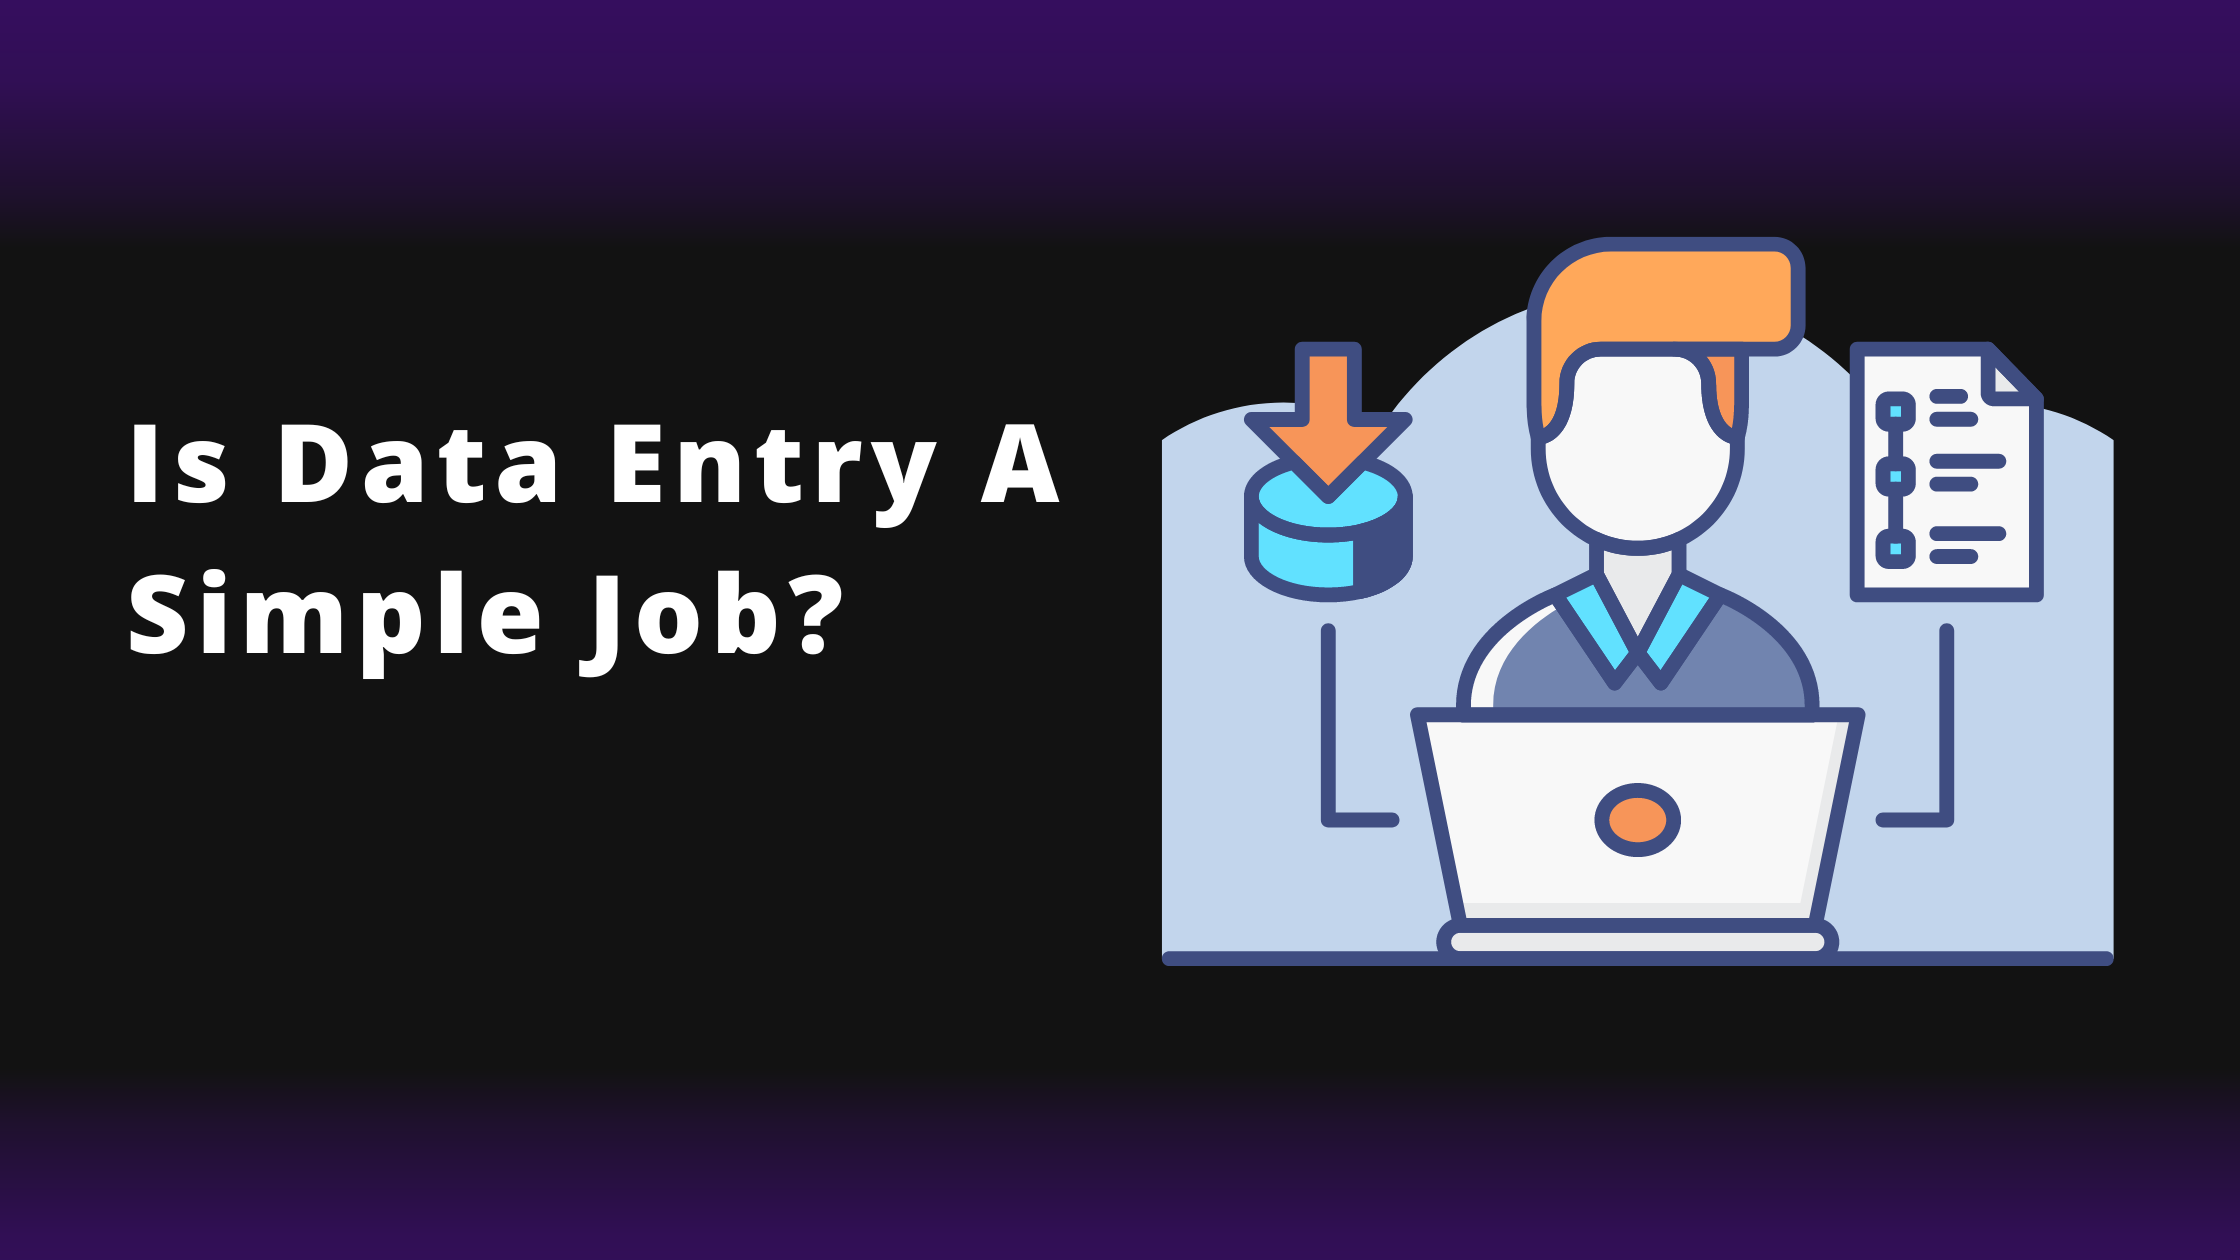 Is Data Entry a Simple Job?